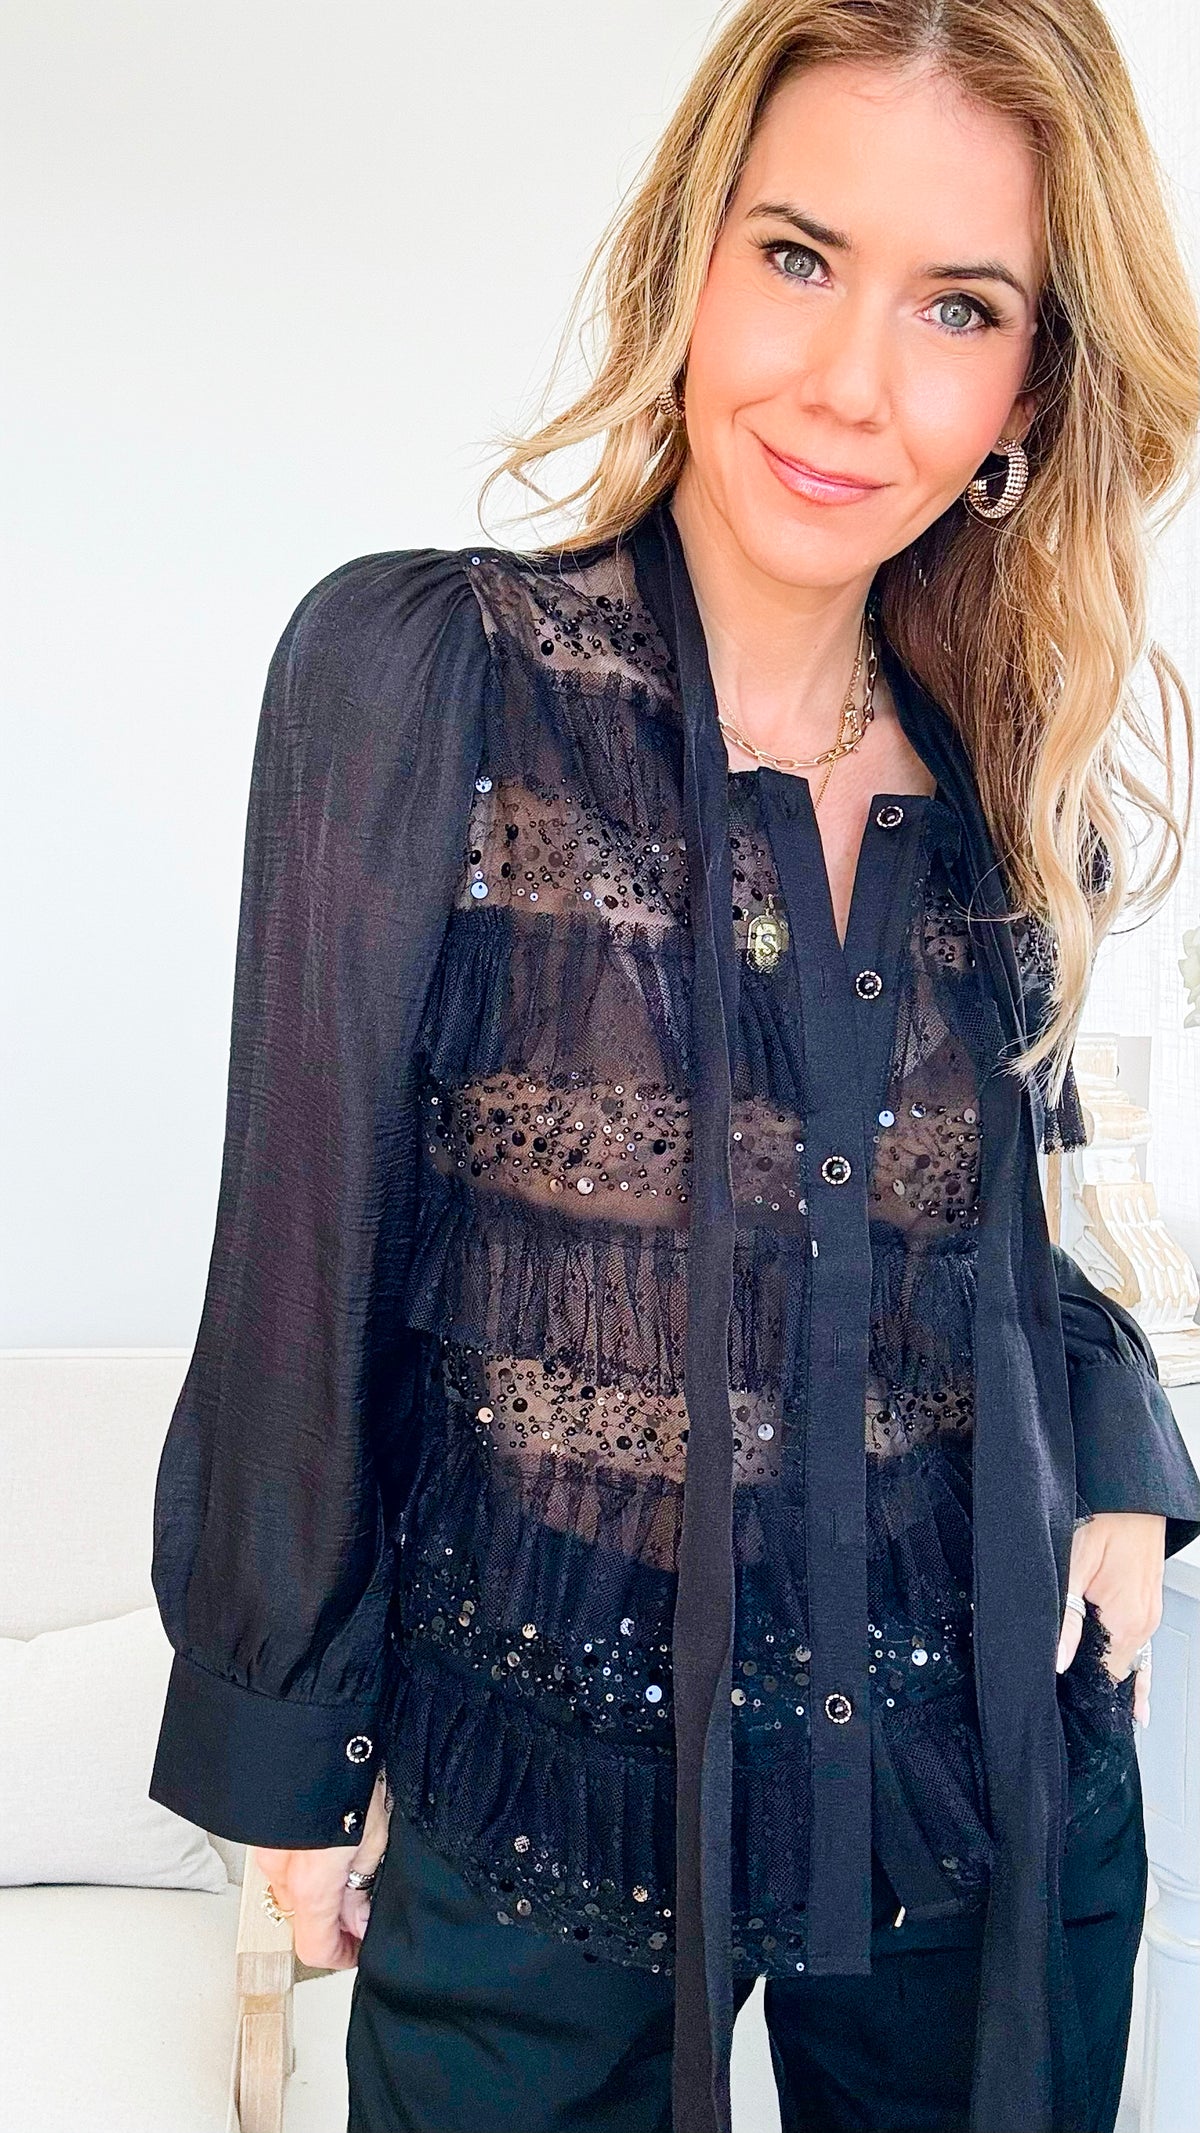 Coquette Bow Rhinestone Detail Shirt-Black-130 Long Sleeve Tops-pastel design-Coastal Bloom Boutique, find the trendiest versions of the popular styles and looks Located in Indialantic, FL